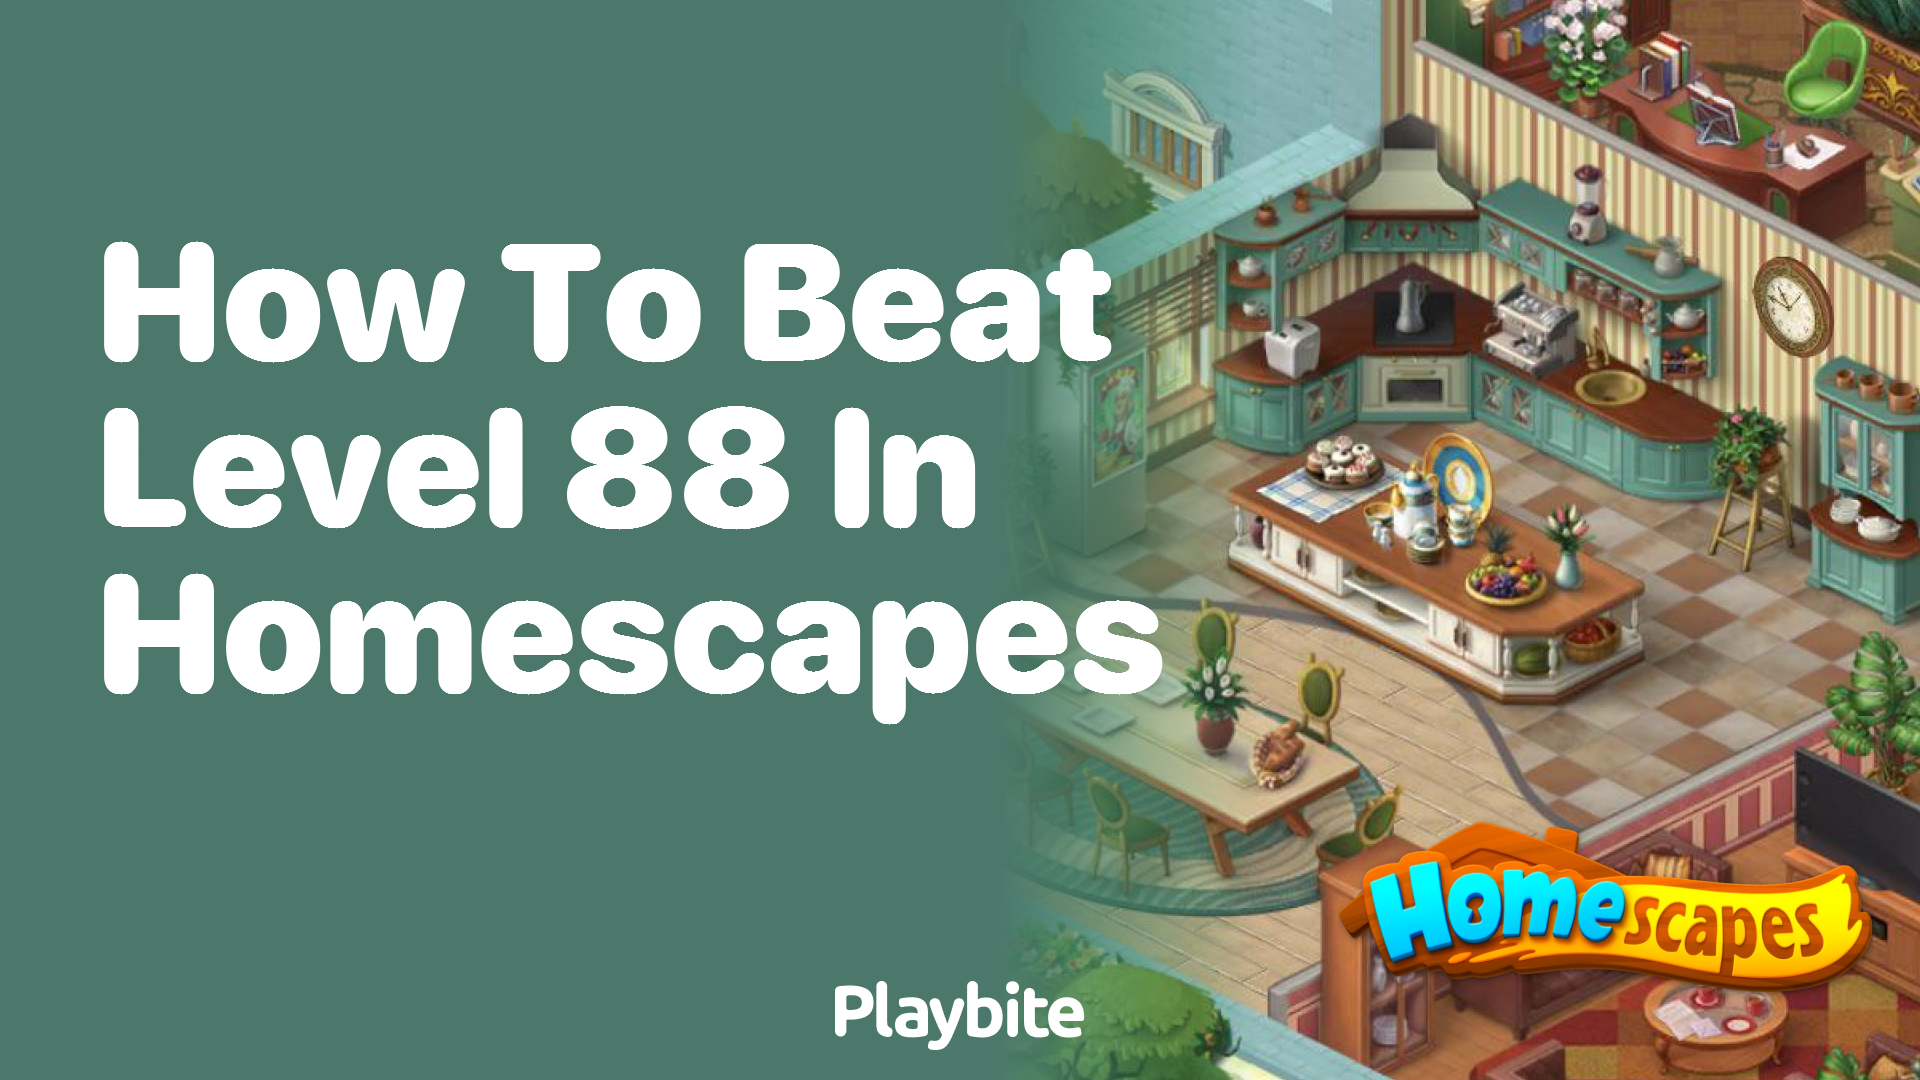 How to Beat Level 88 in Homescapes